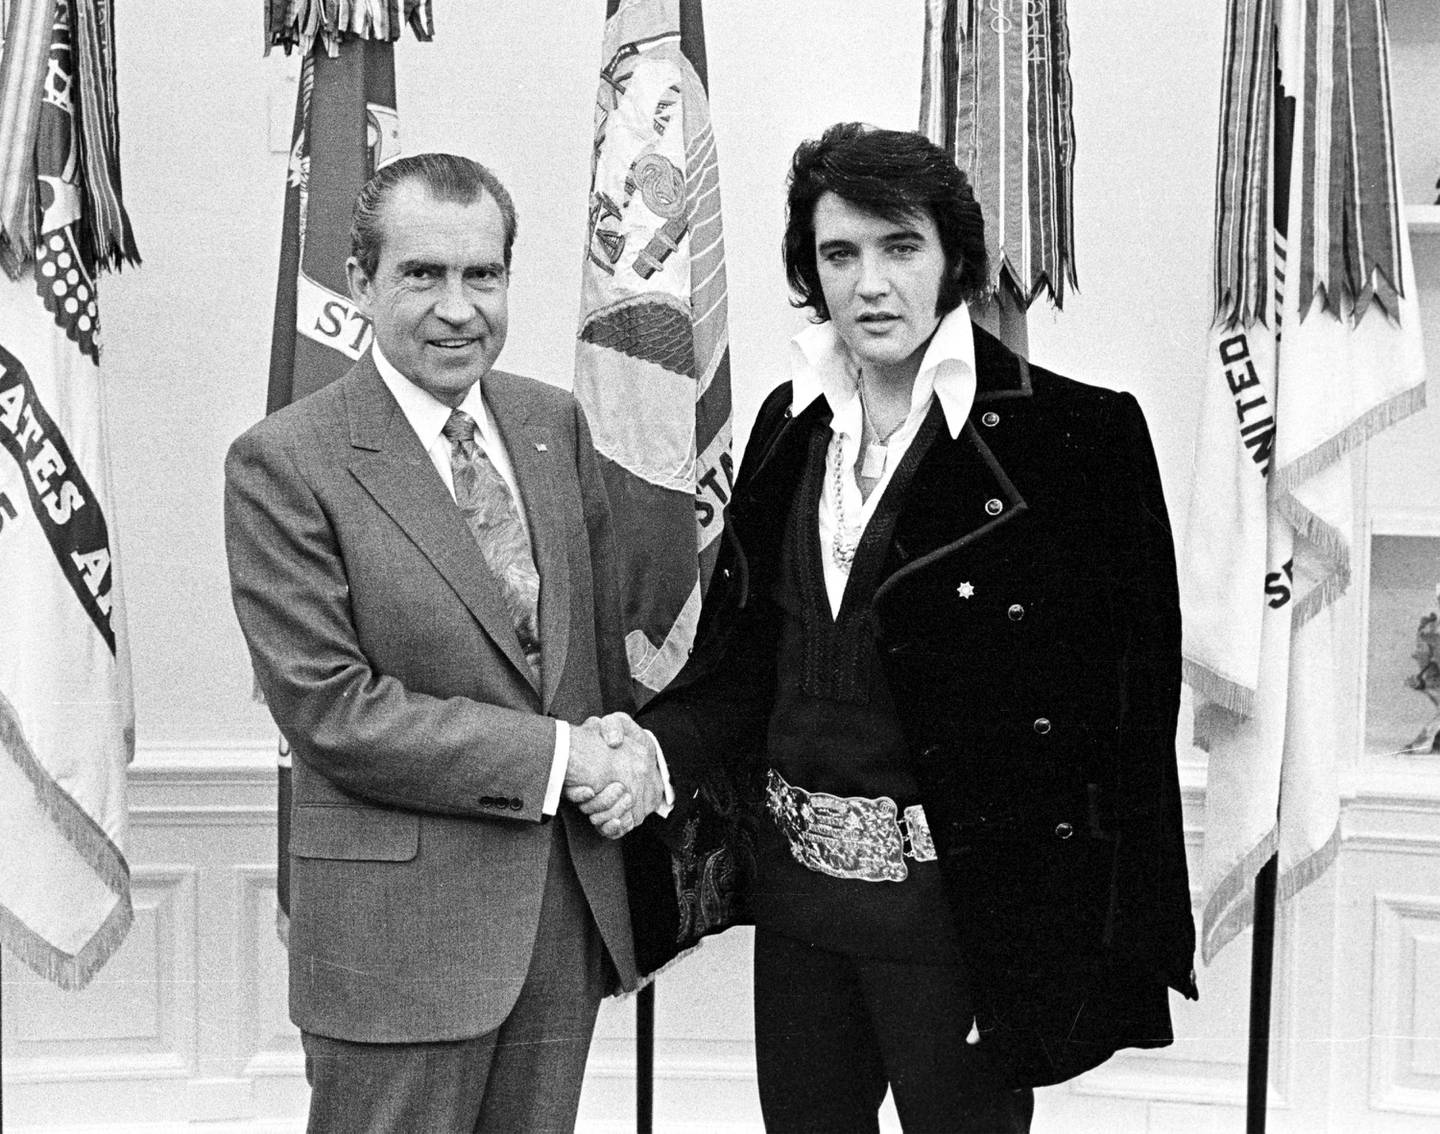 President Richard Nixon meets Elvis Presley at the White House on December 21, 1970. Photo: National Archive / Newsmakers